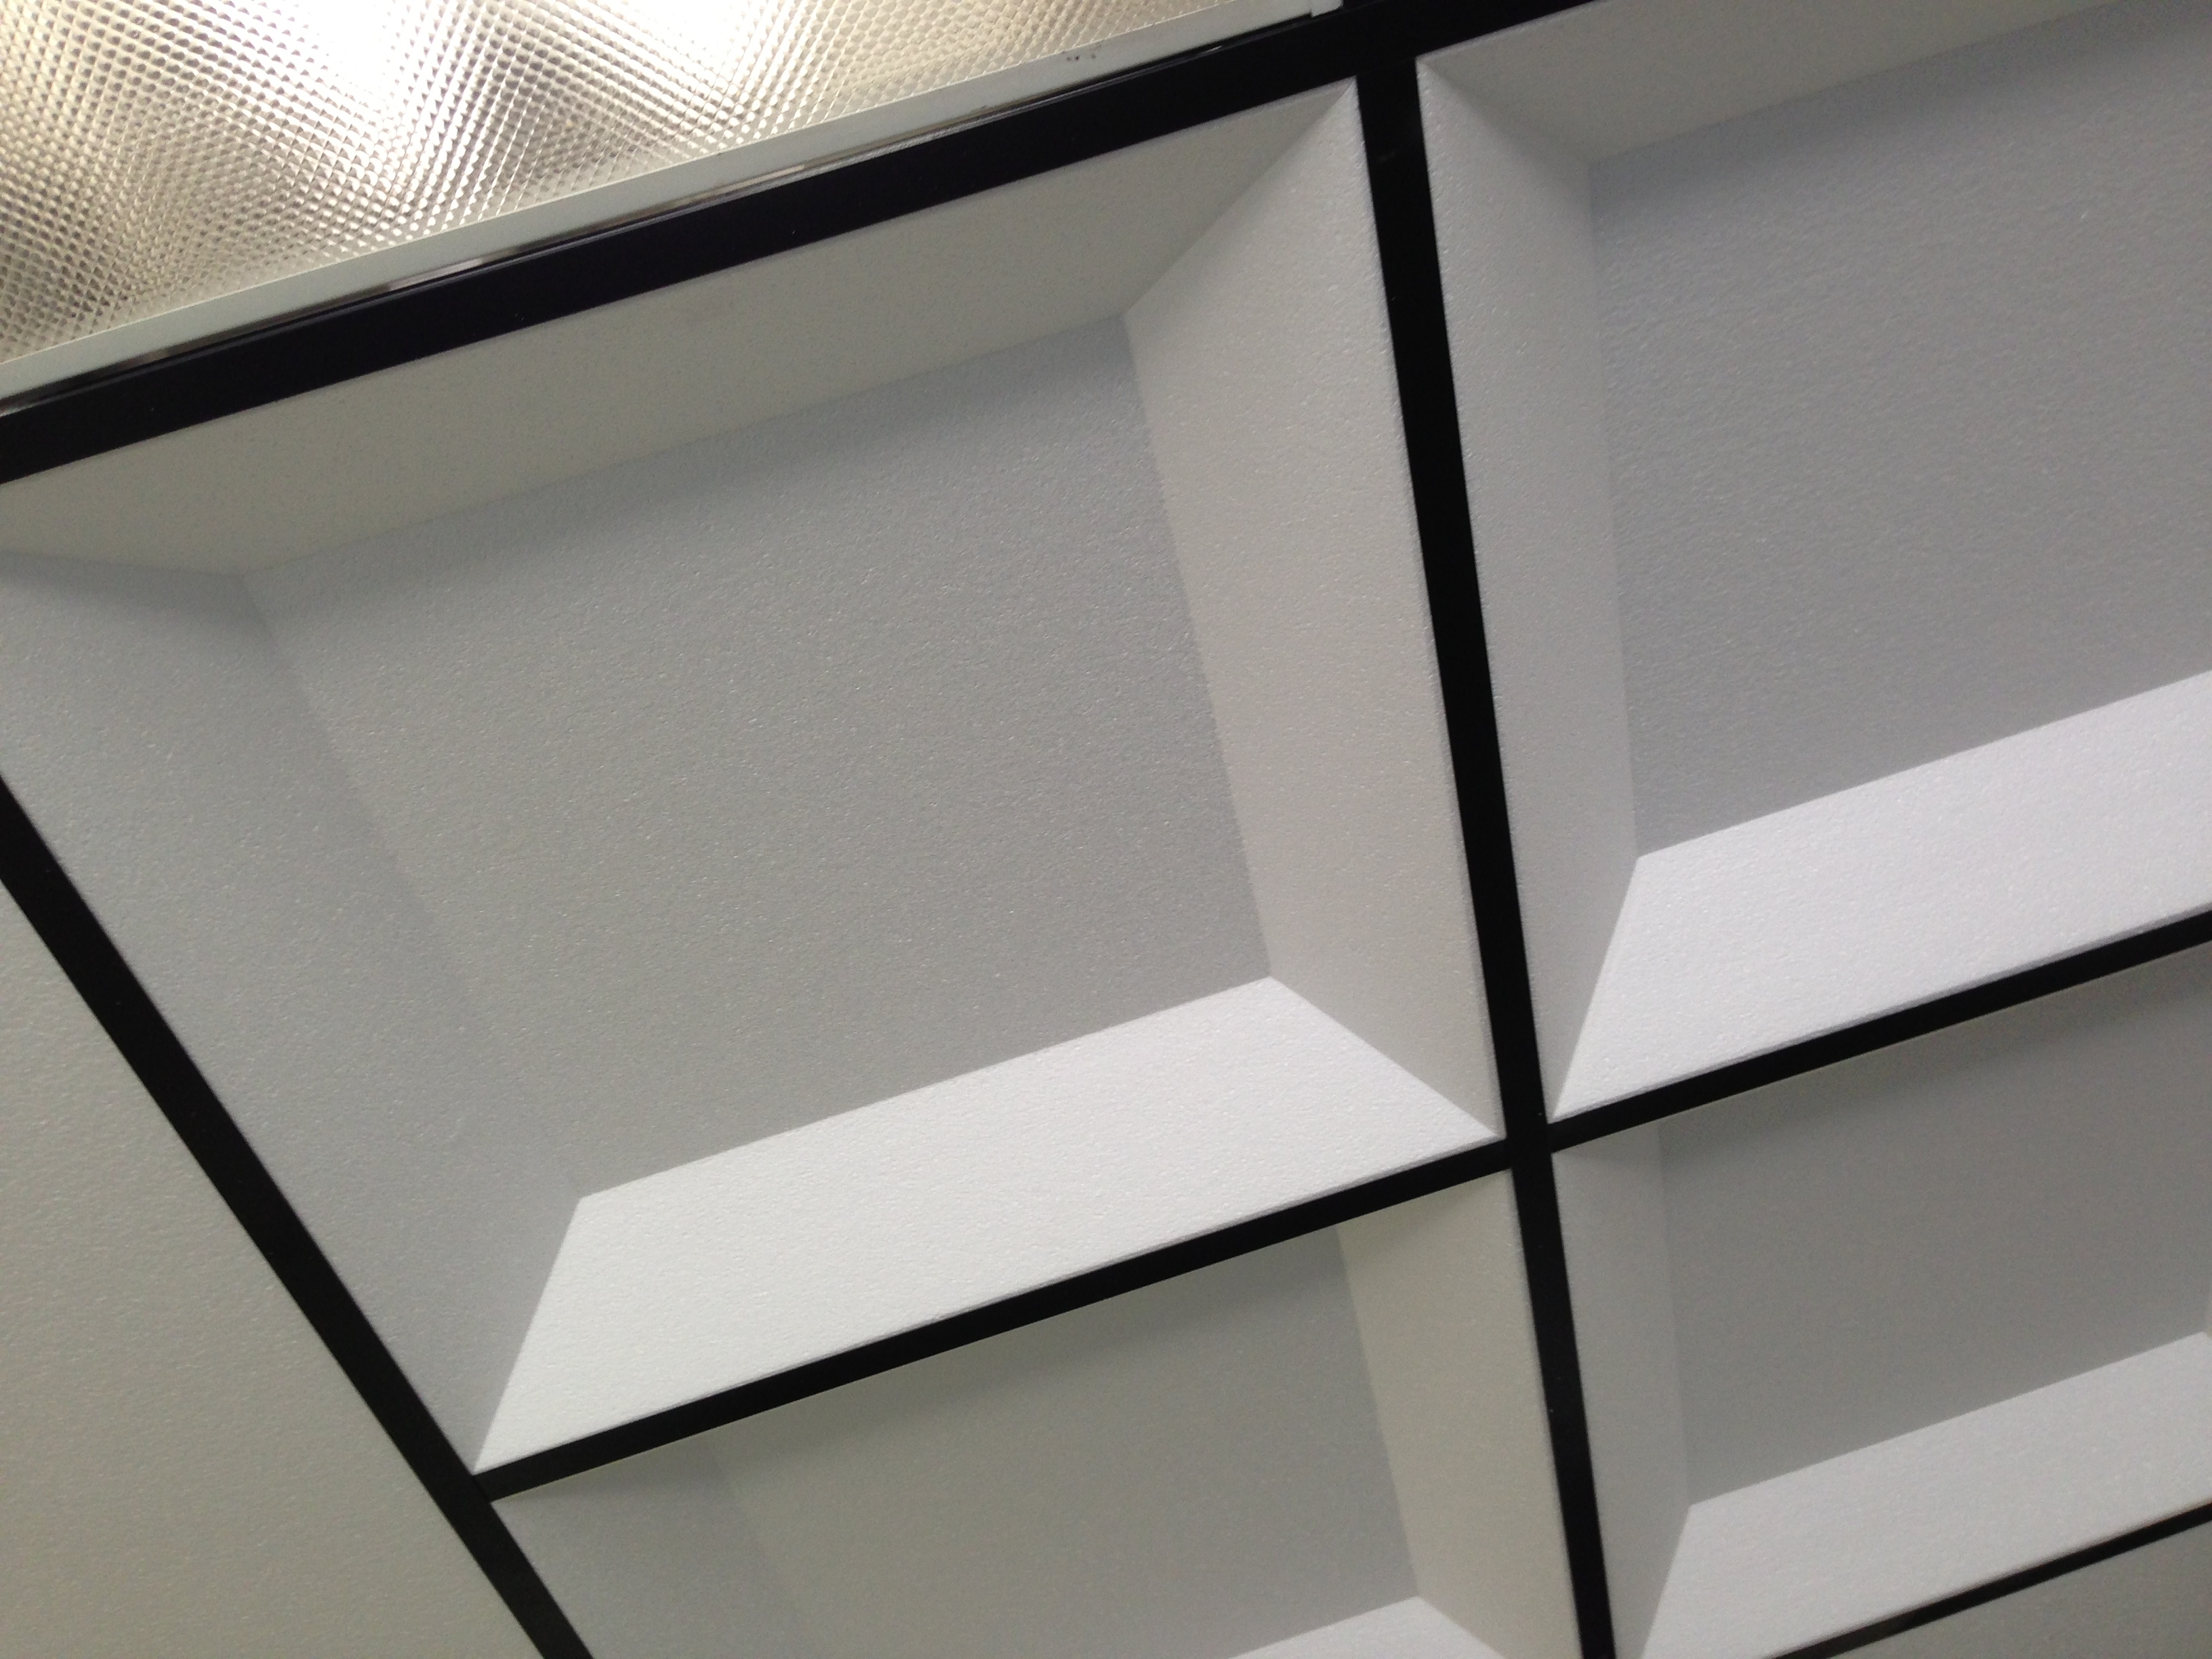 Permalink to Architectural Drop Ceiling Tiles